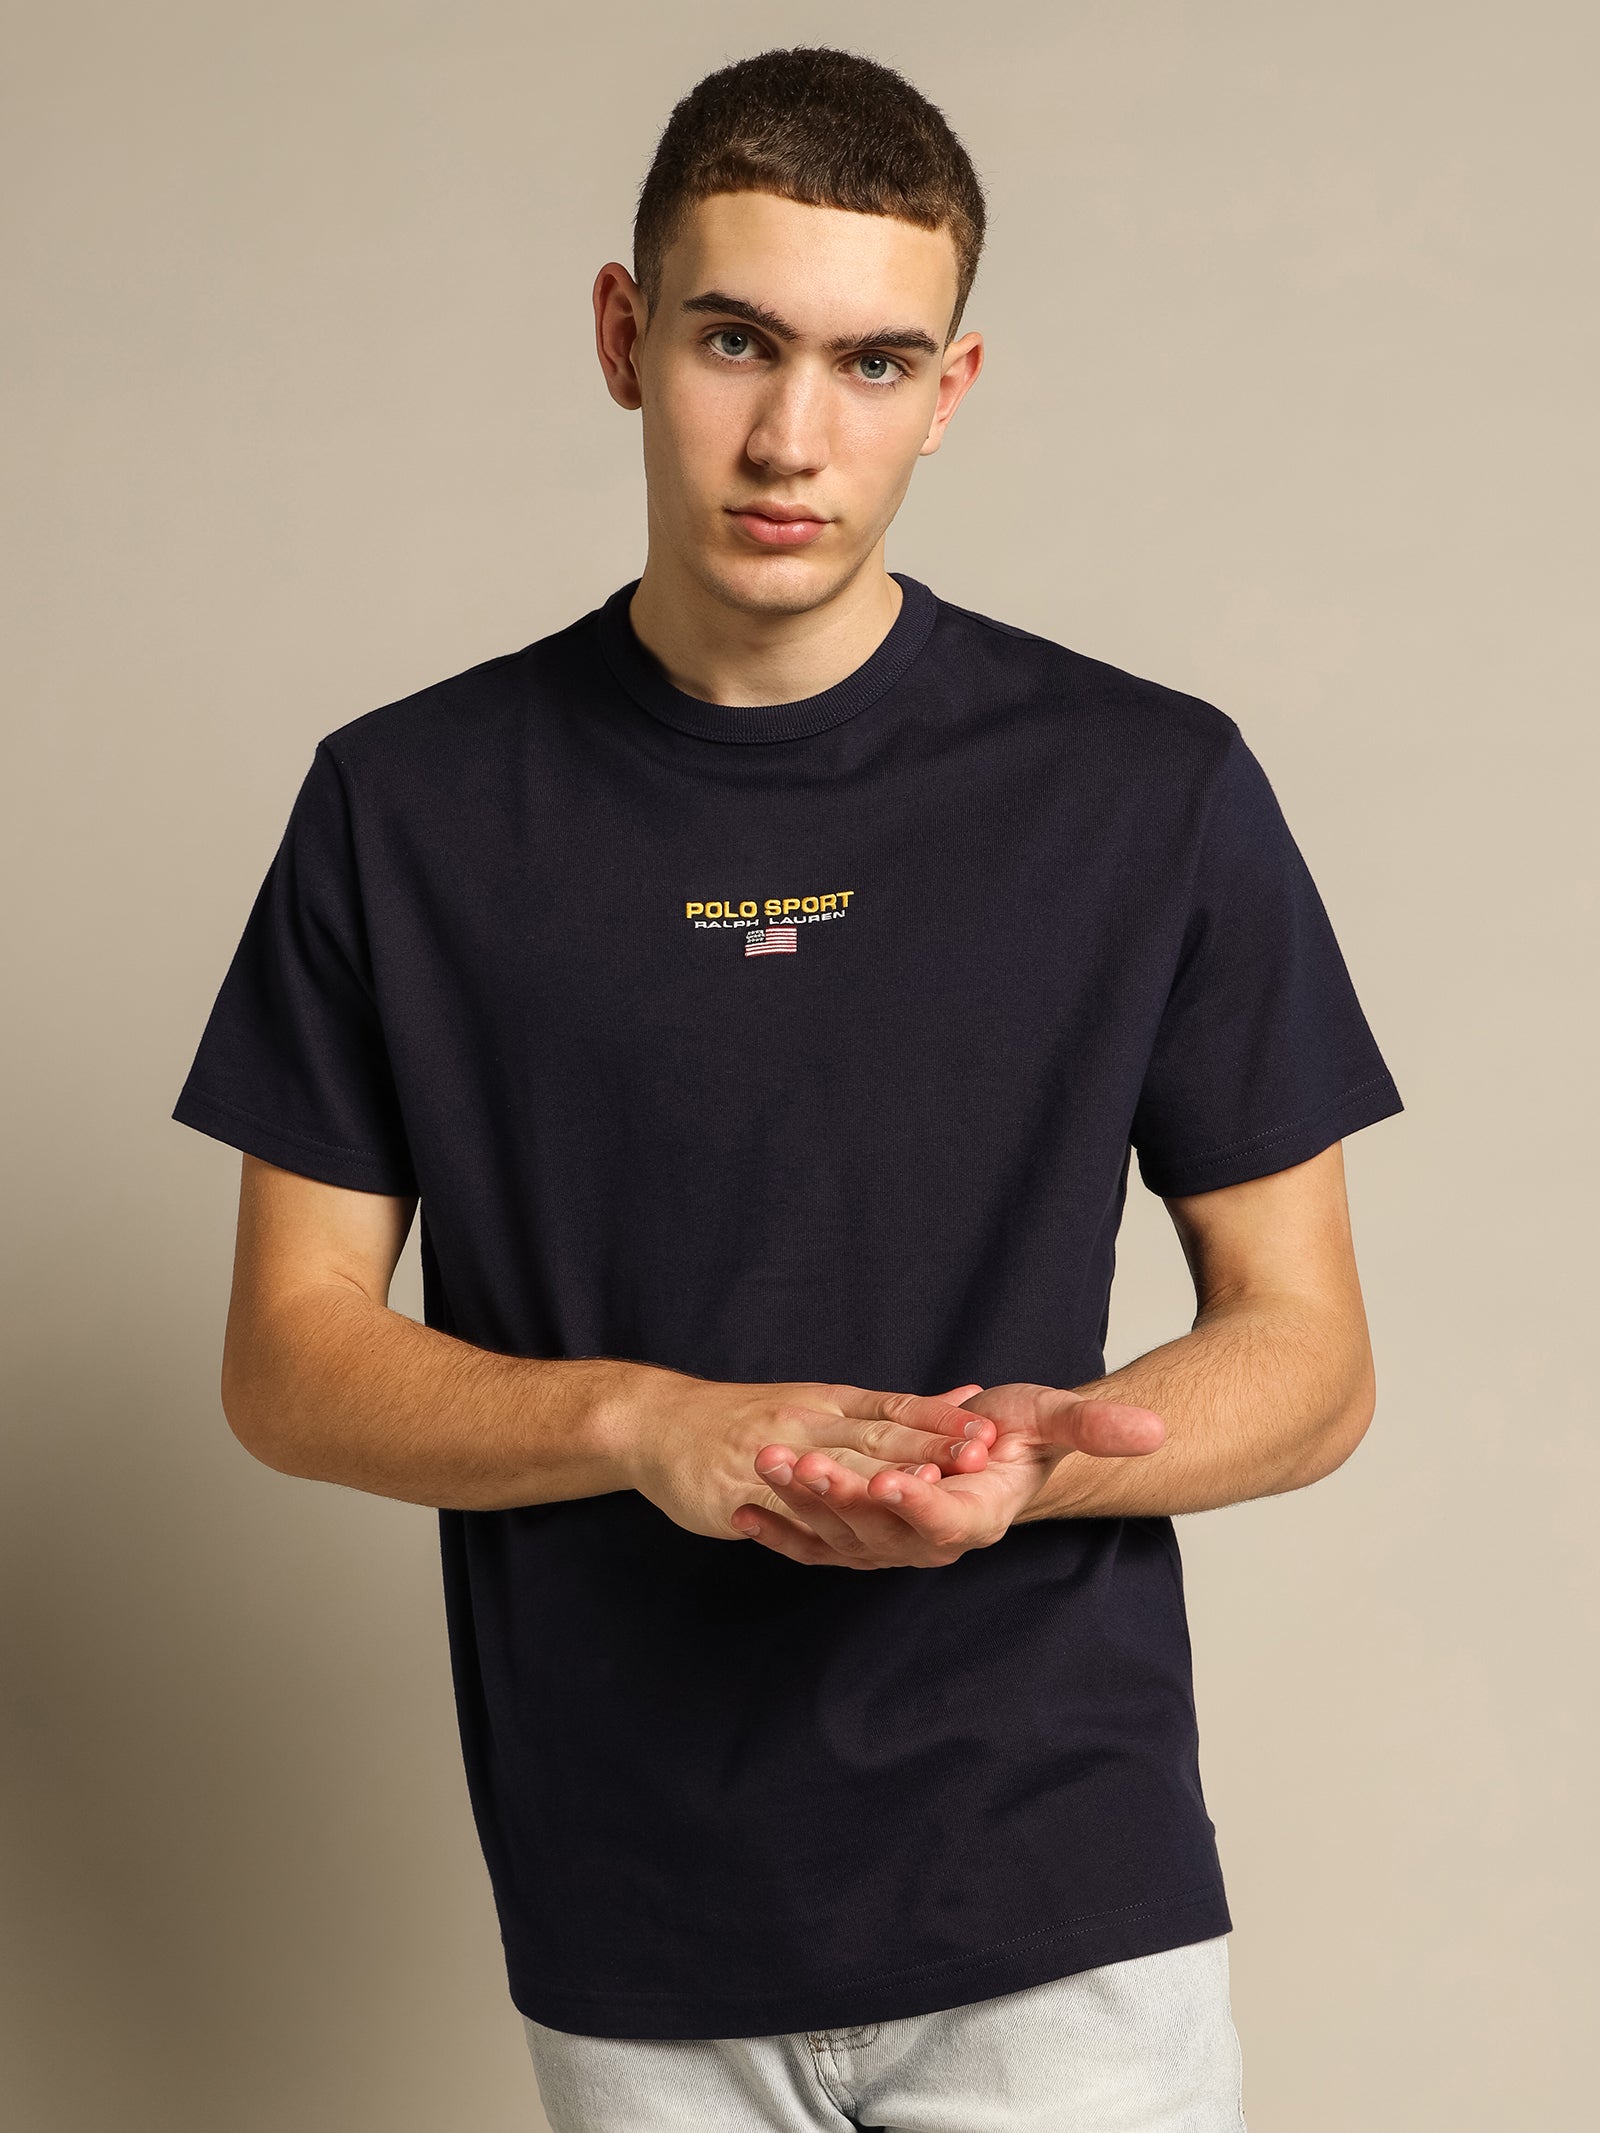 Polo Sport T-Shirt in Navy - Glue Store